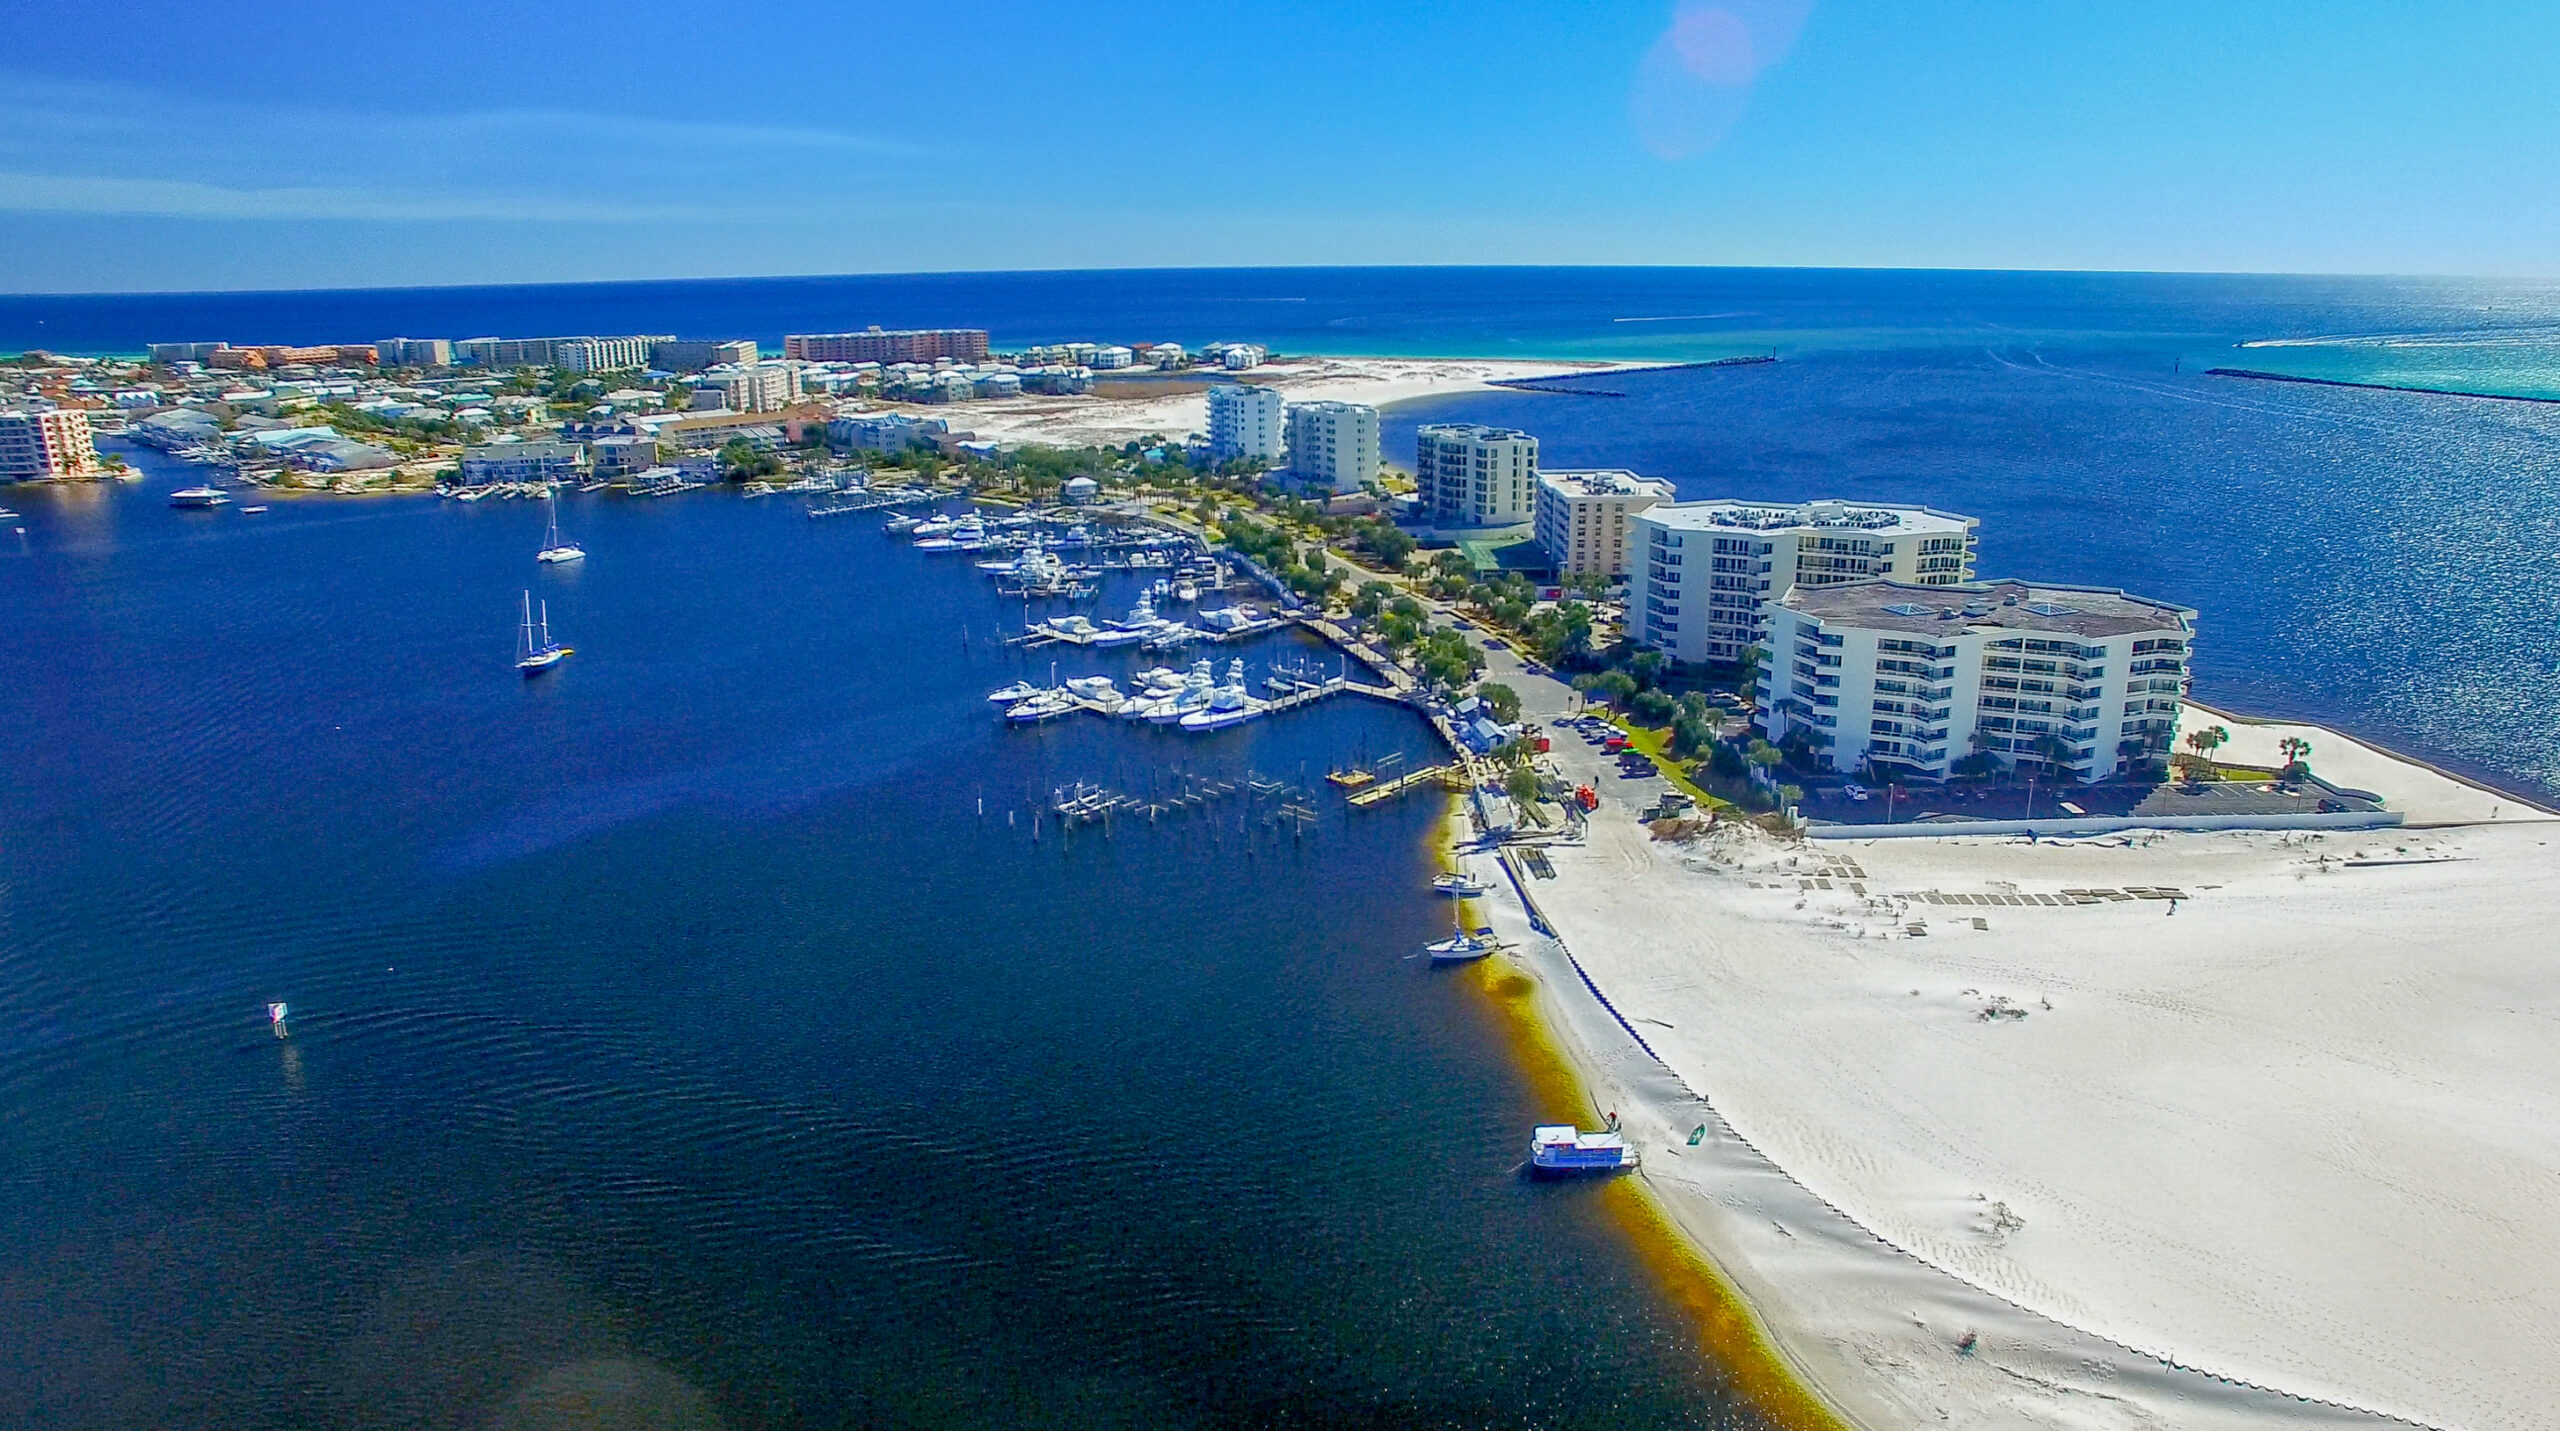 10 Pros and Cons of living in Destin, FL 2023 - Home & Money